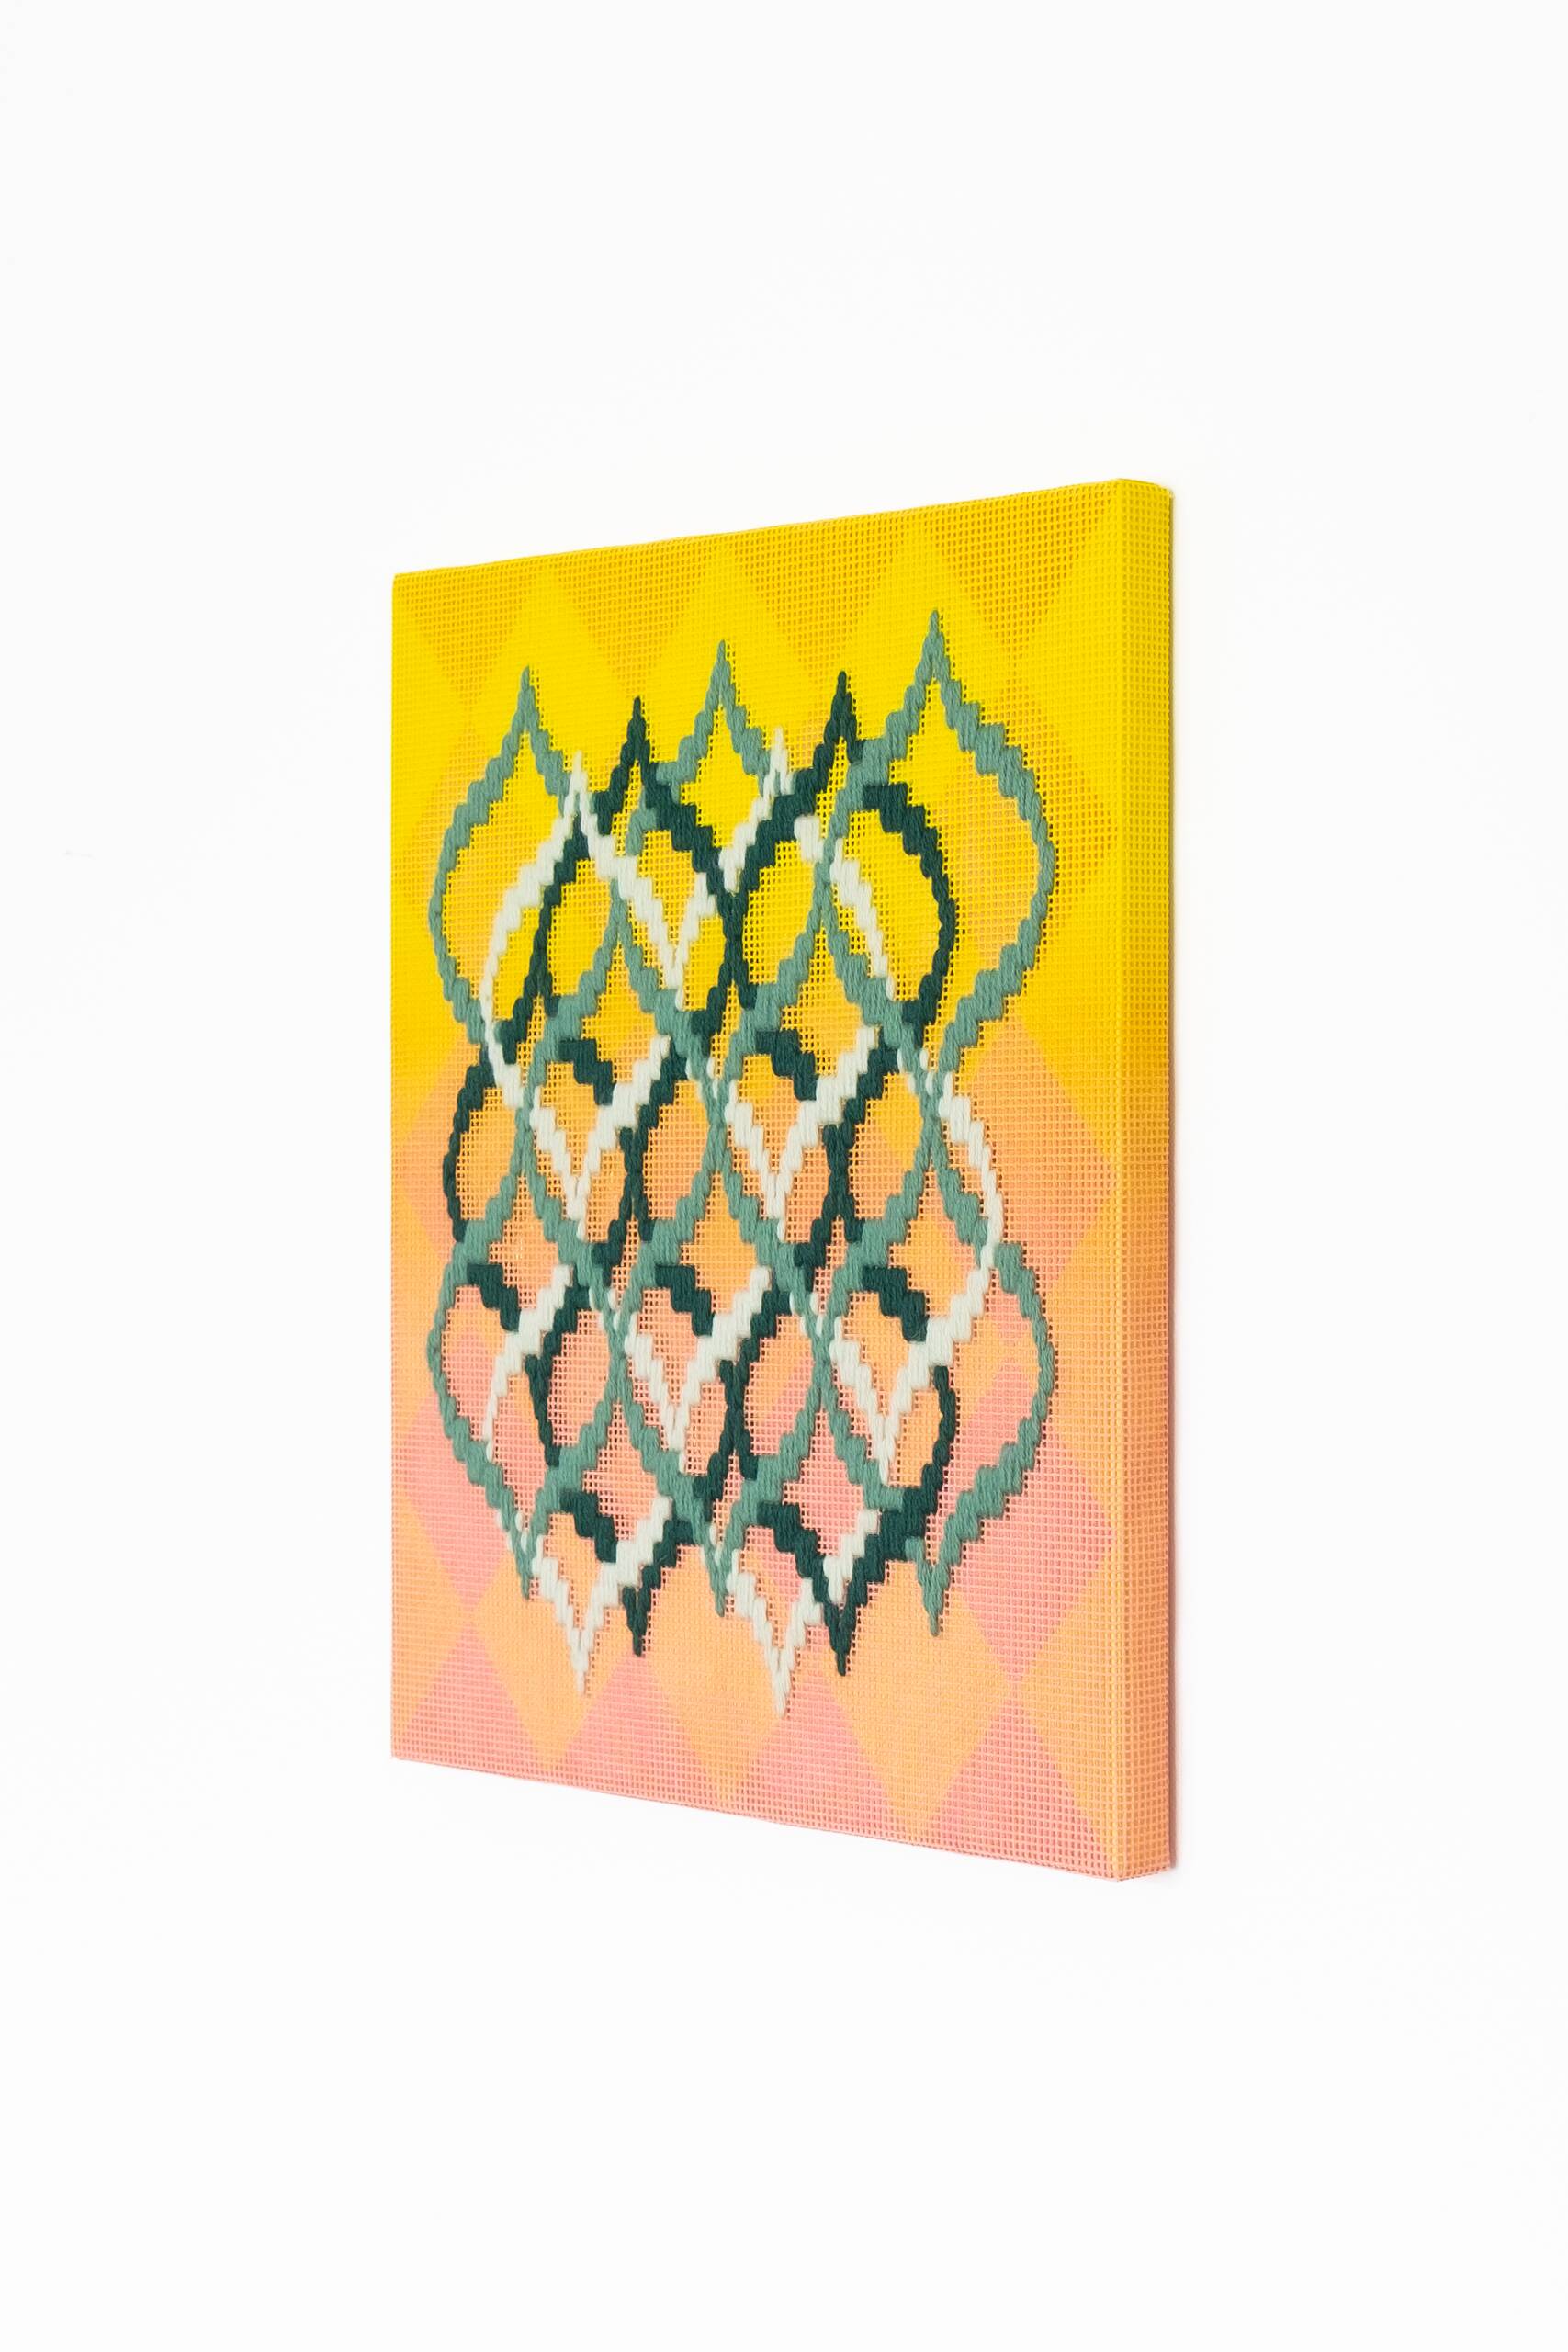 Pattern analysis [Golden Ratio, yellow and coral], Hand-embroidered wool yarn and acrylic paint on canvas over painted and gilded panel, 2022